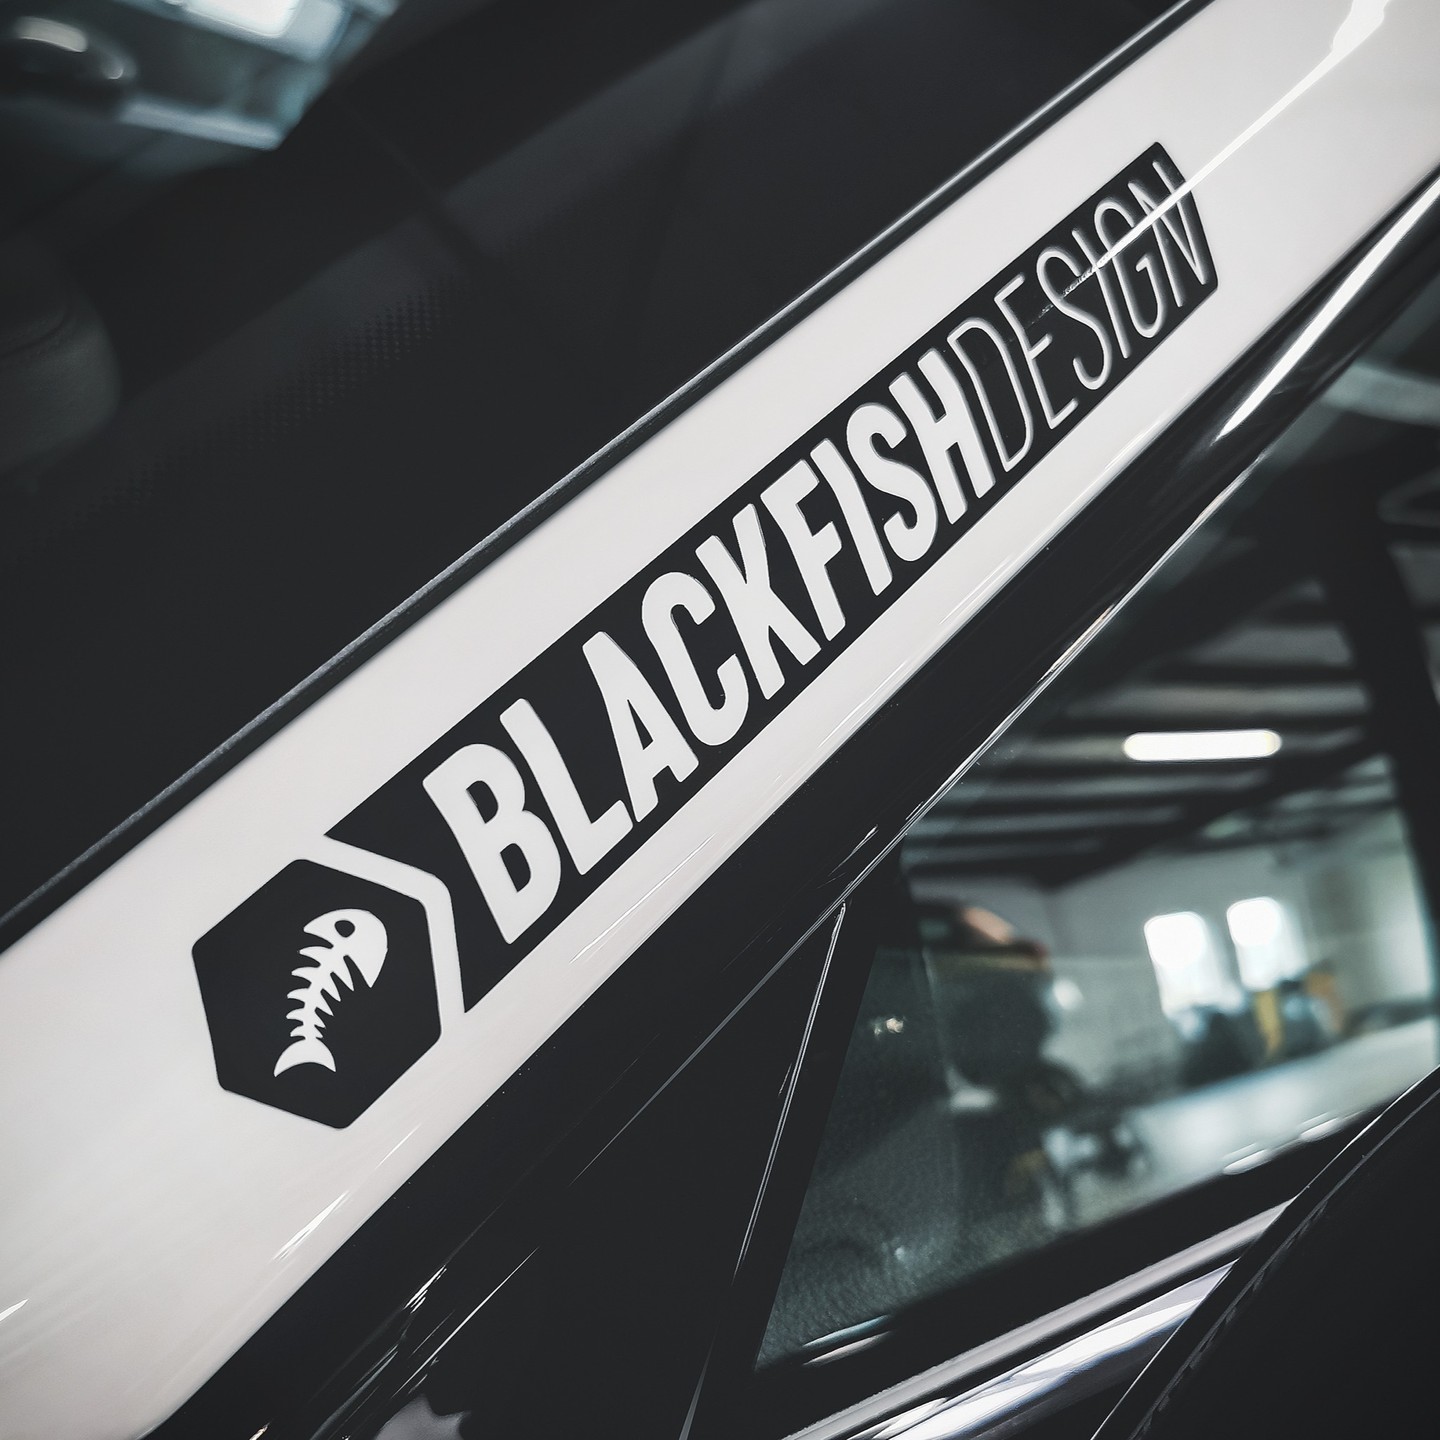 We may welcome an expansion of our fulltime in-house design department. First concept and customer projects in progress and also adding a full print / design service to other companies and wrappers worldwide. A new era for BlackFish!

#blackfish #blackfishgraphics #blackfishdesign #nuerburgring #design #liverydesign #art #style #automotive #racing #tuning #cars #performance #worldwide #instagramhub #2022